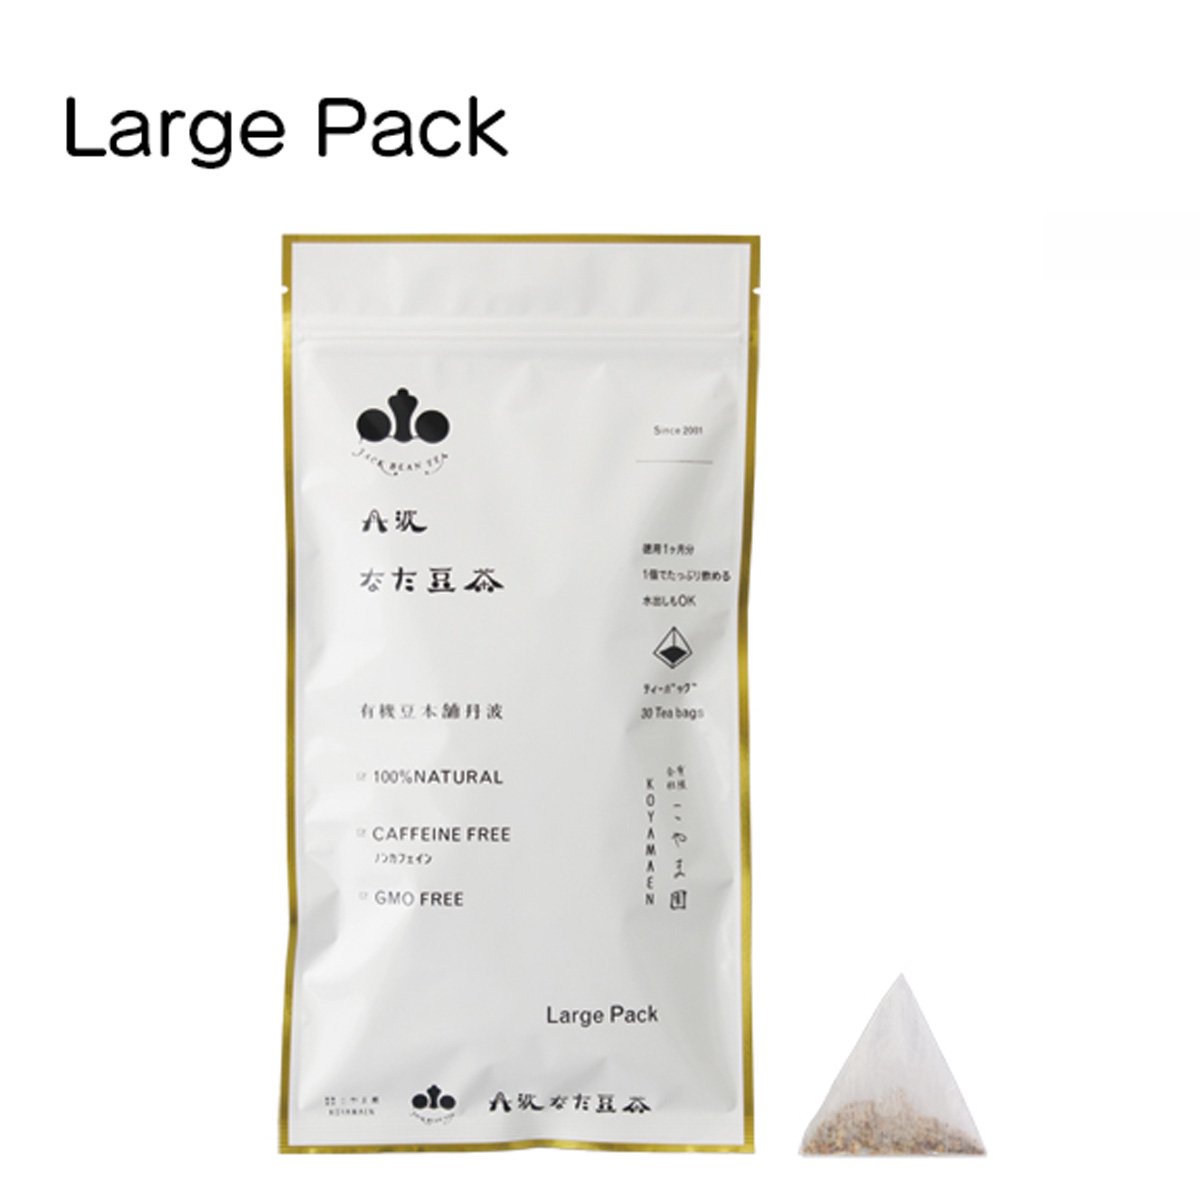 Large Pack